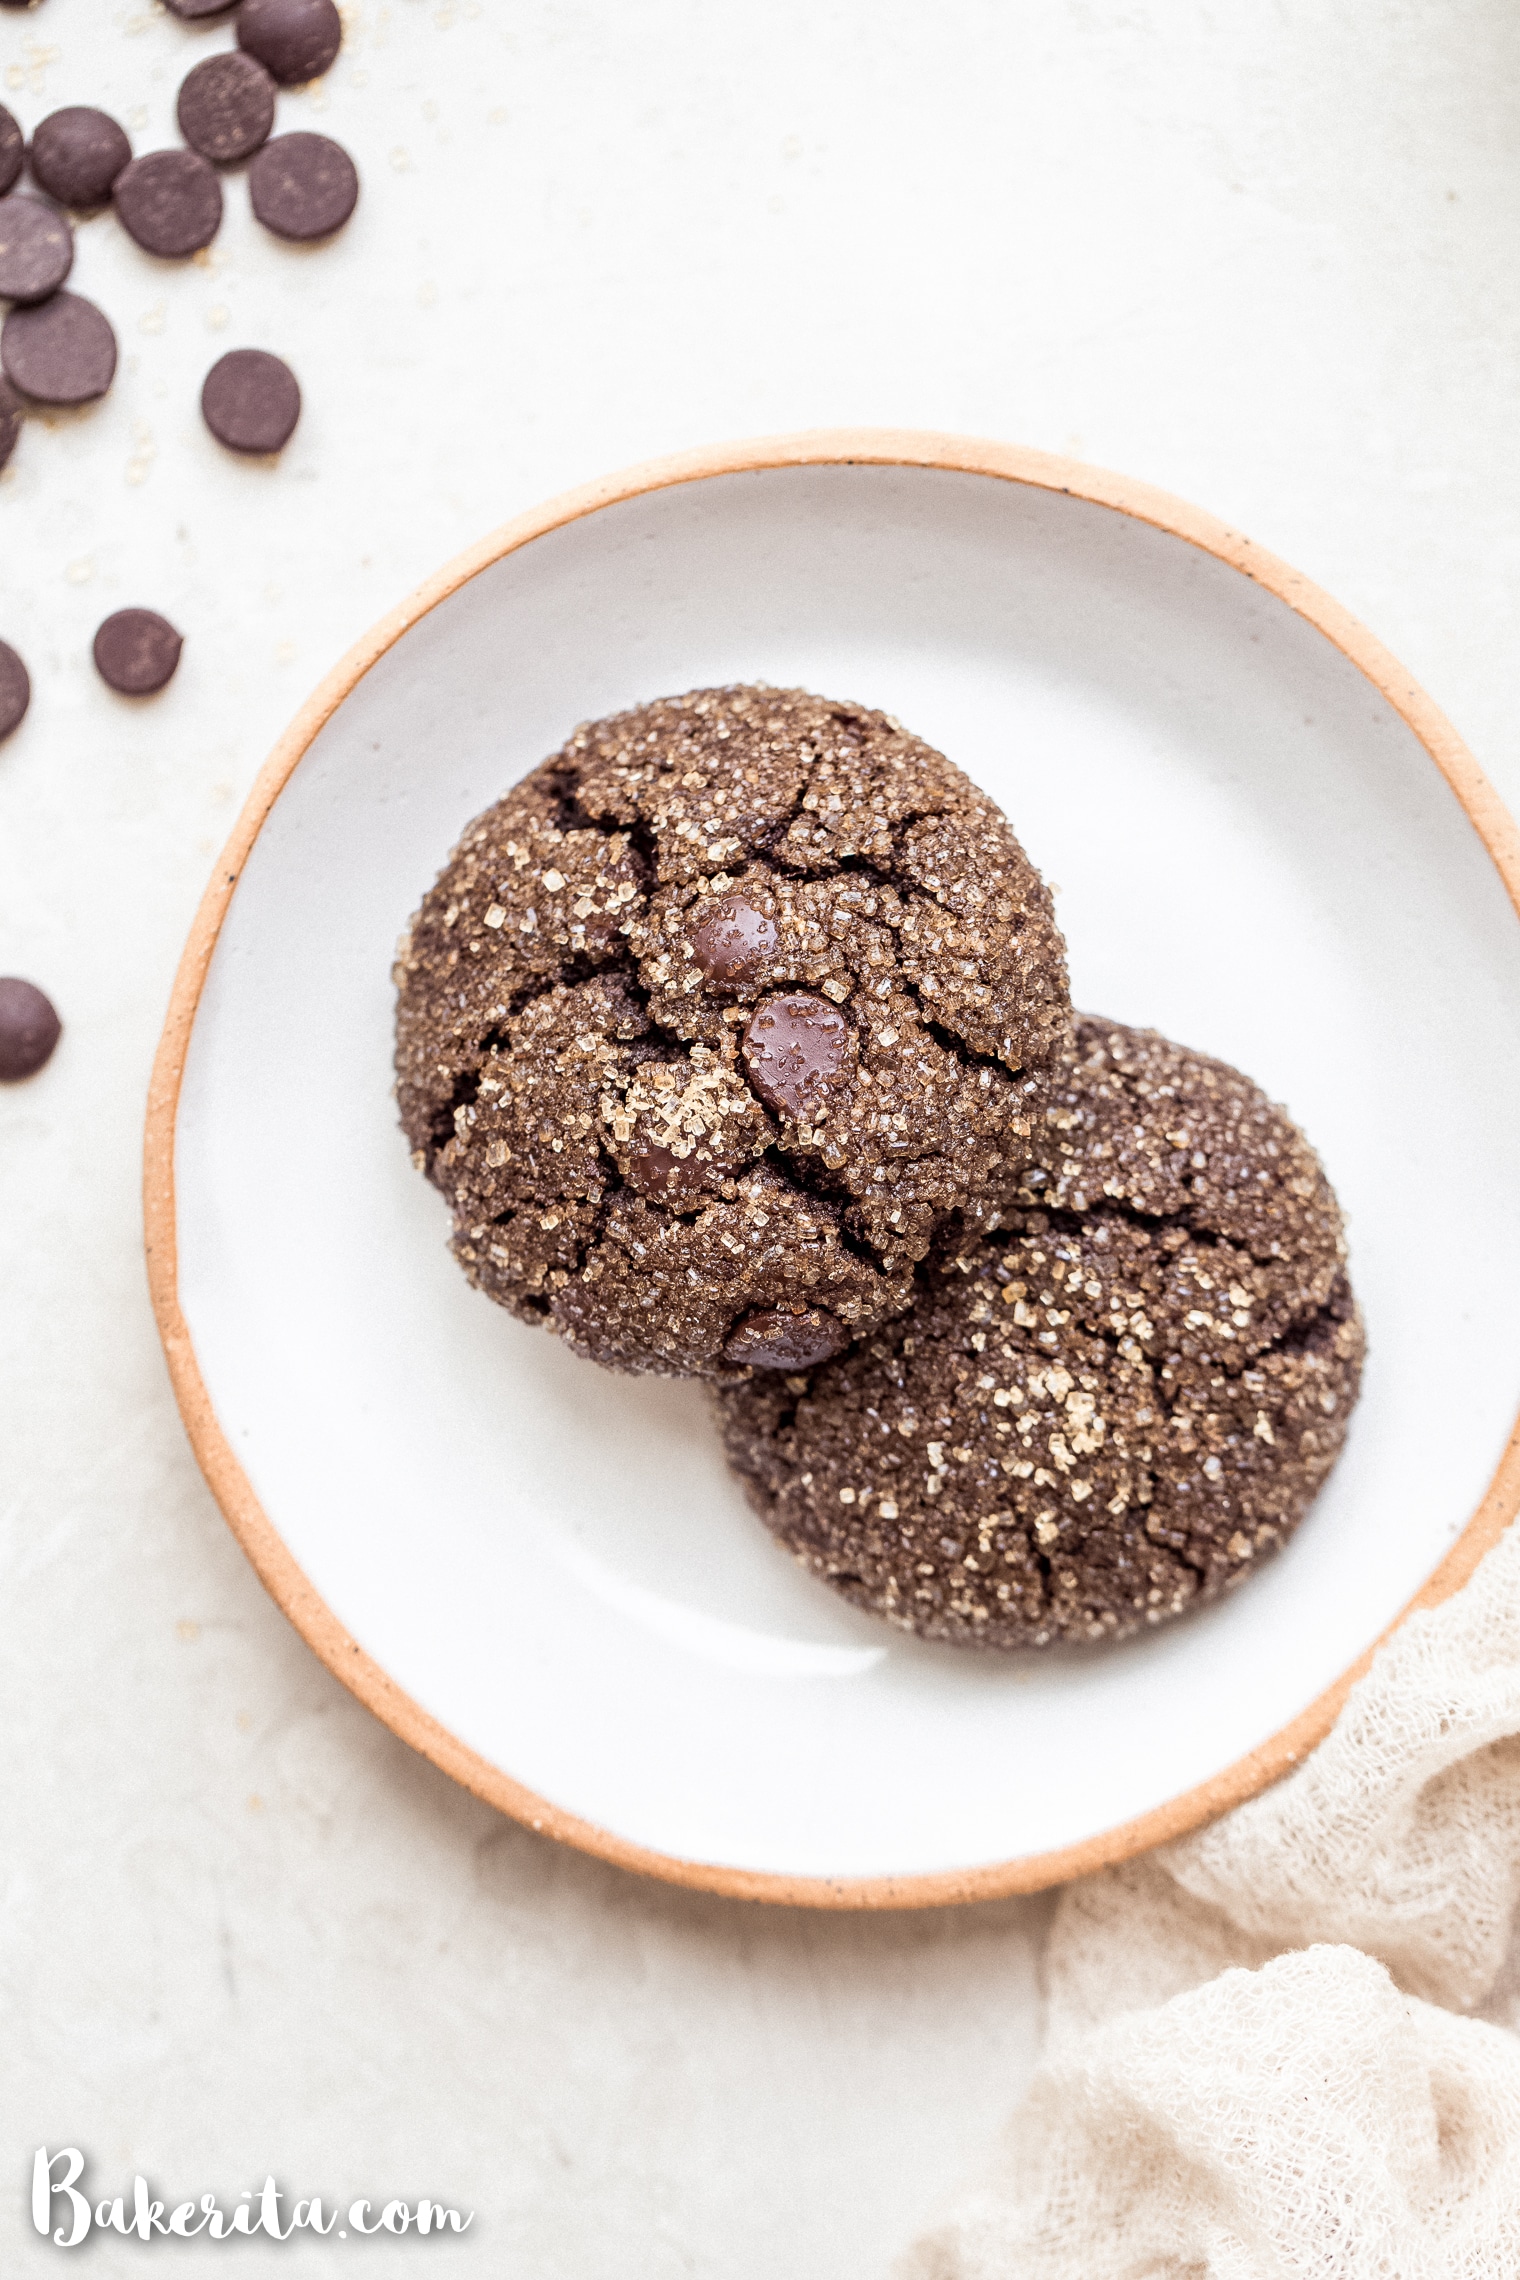 You'll want to make a double batch of these Gluten-Free Vegan Chocolate Crinkle Cookies - one for you, and one to share! These paleo-friendly cookies are perfect for lunchboxes, the holidays, or even a weeknight dessert - thankfully, they come together quickly!